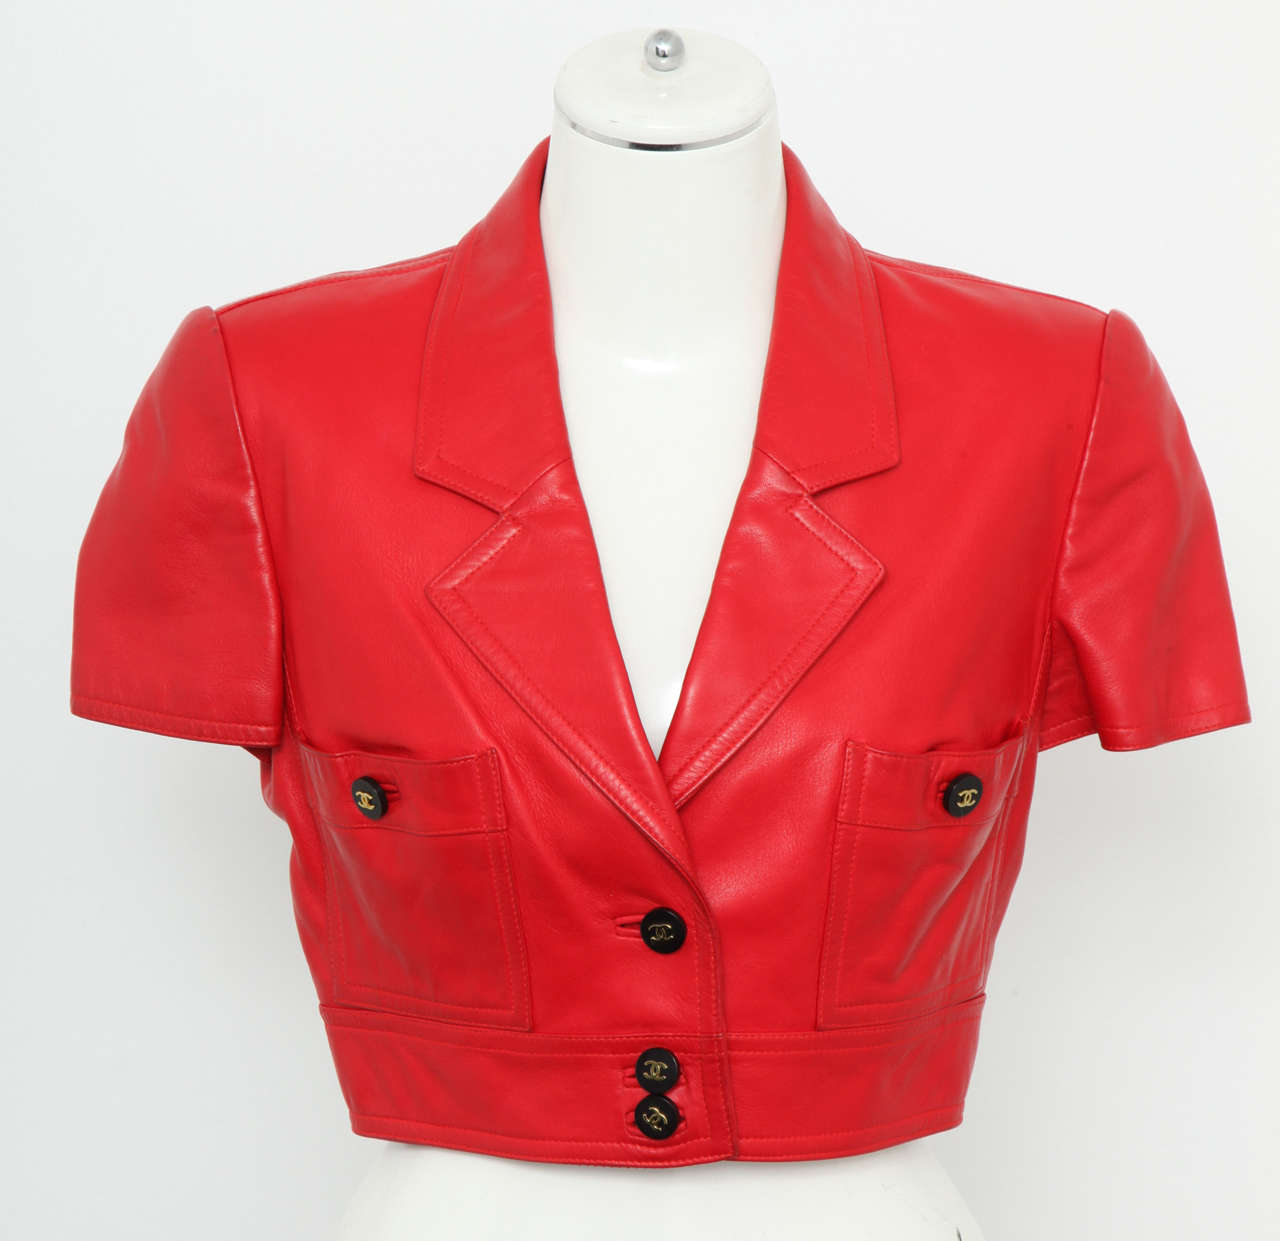 Very rare Chanel red cropped leather jacket with silk print lining.
From 1995 Spring collection.

Size FR36
Shoulder 15.5 inches
Armpit to armpit 16 inches
Length 16 inches